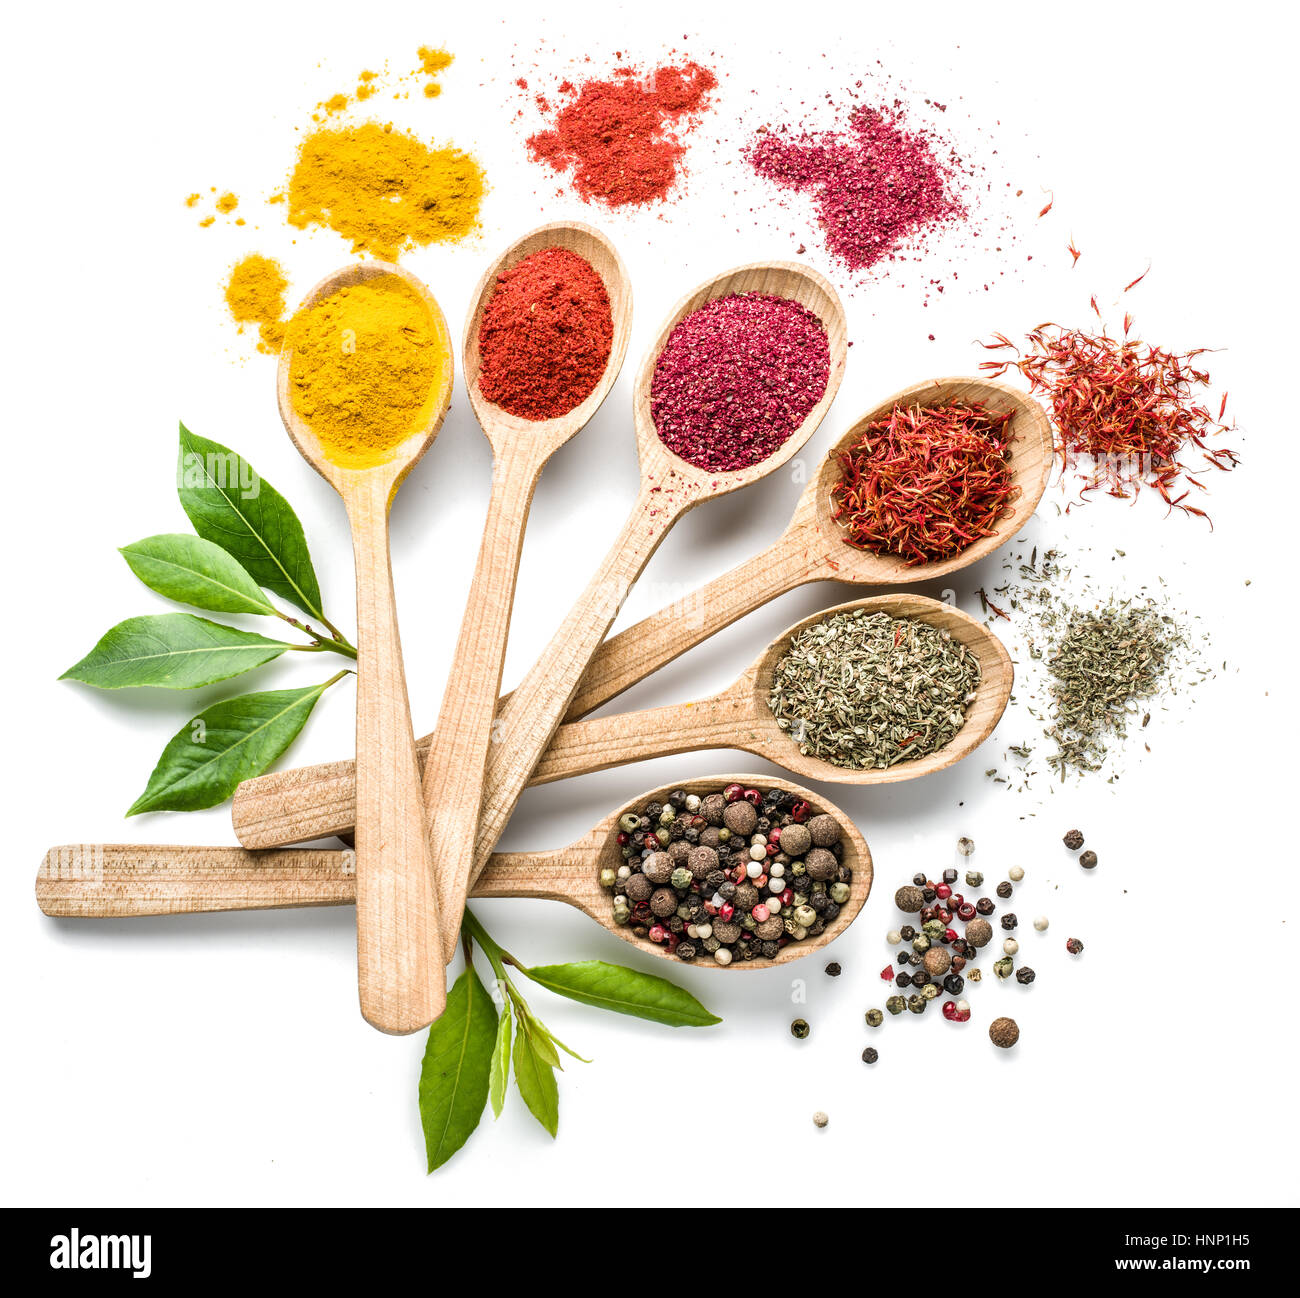 https://c8.alamy.com/comp/HNP1H5/assortment-of-colorful-spices-in-the-wooden-spoons-on-the-white-background-HNP1H5.jpg